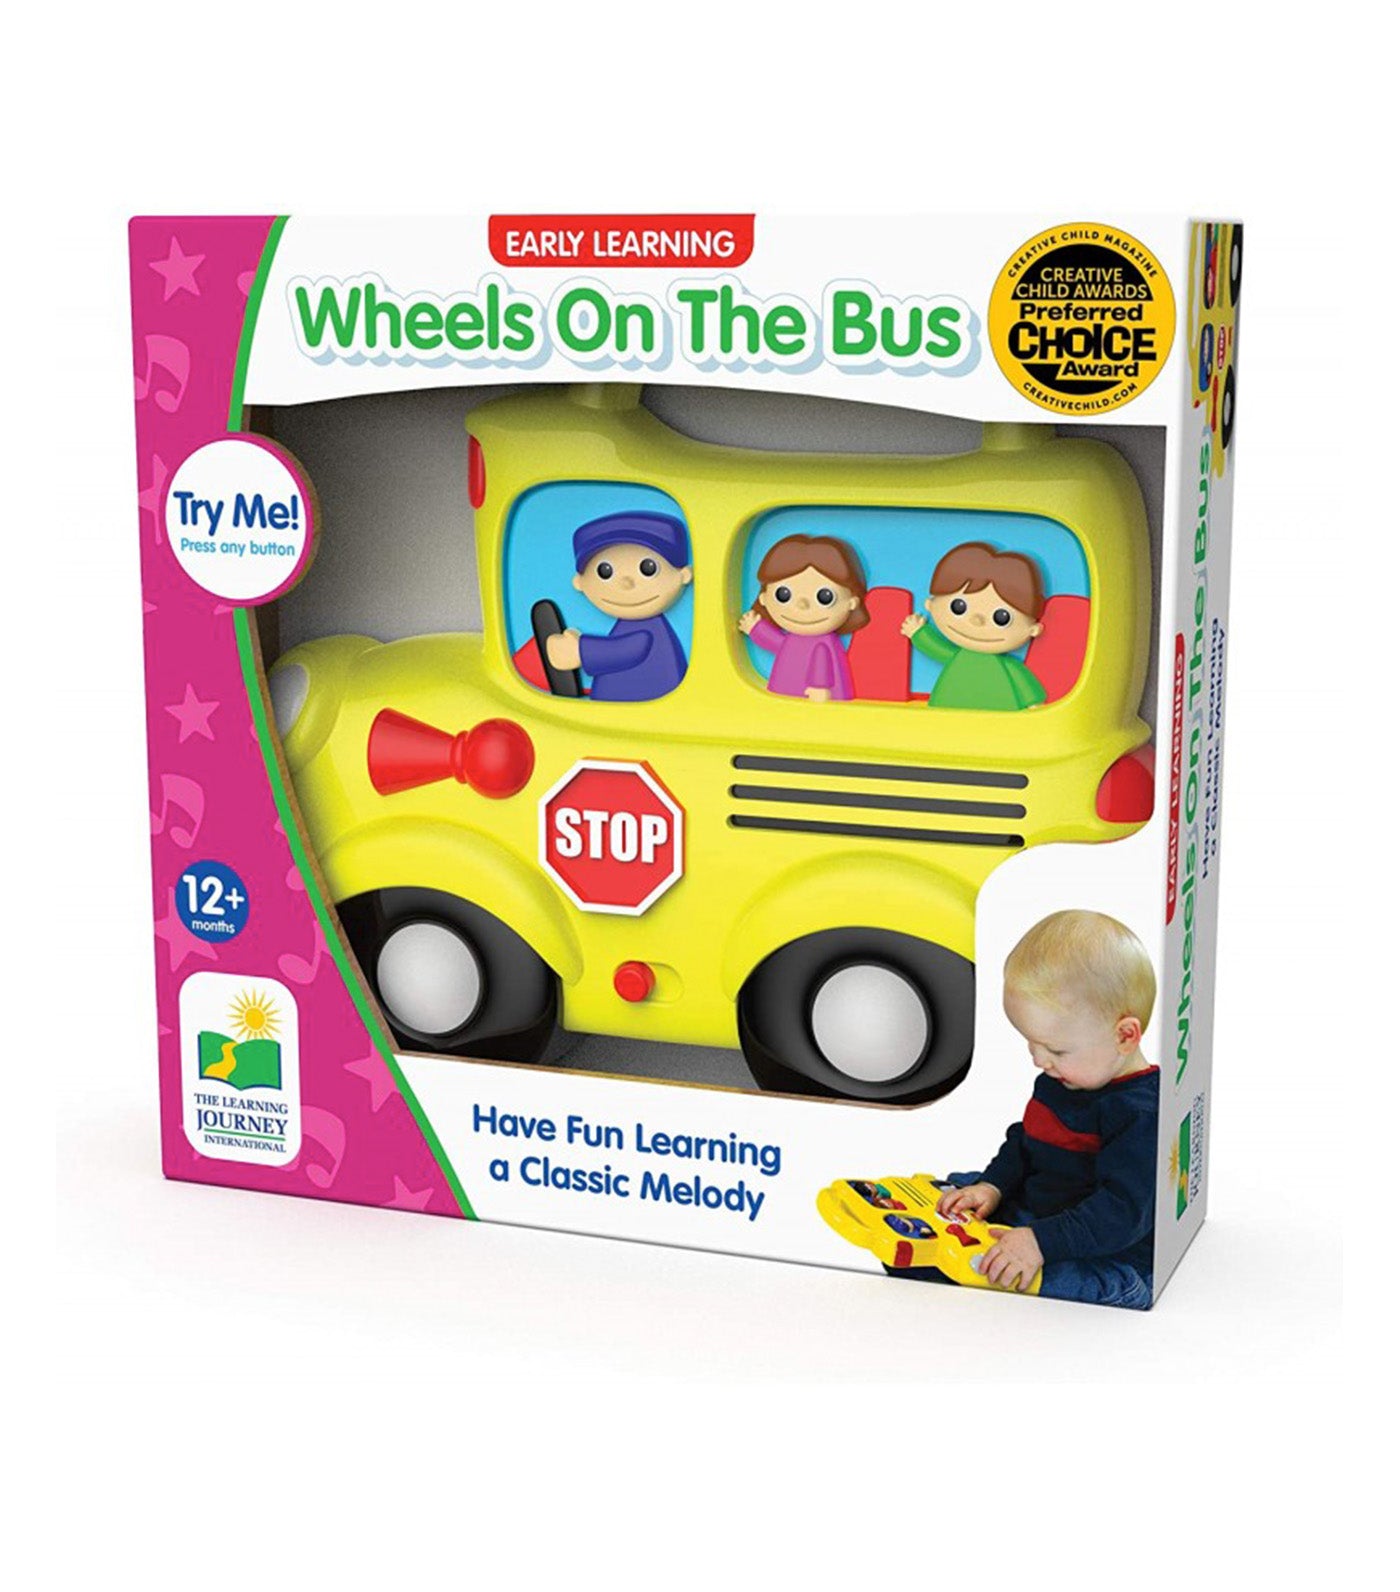 Early Learning - Wheels On The Bus